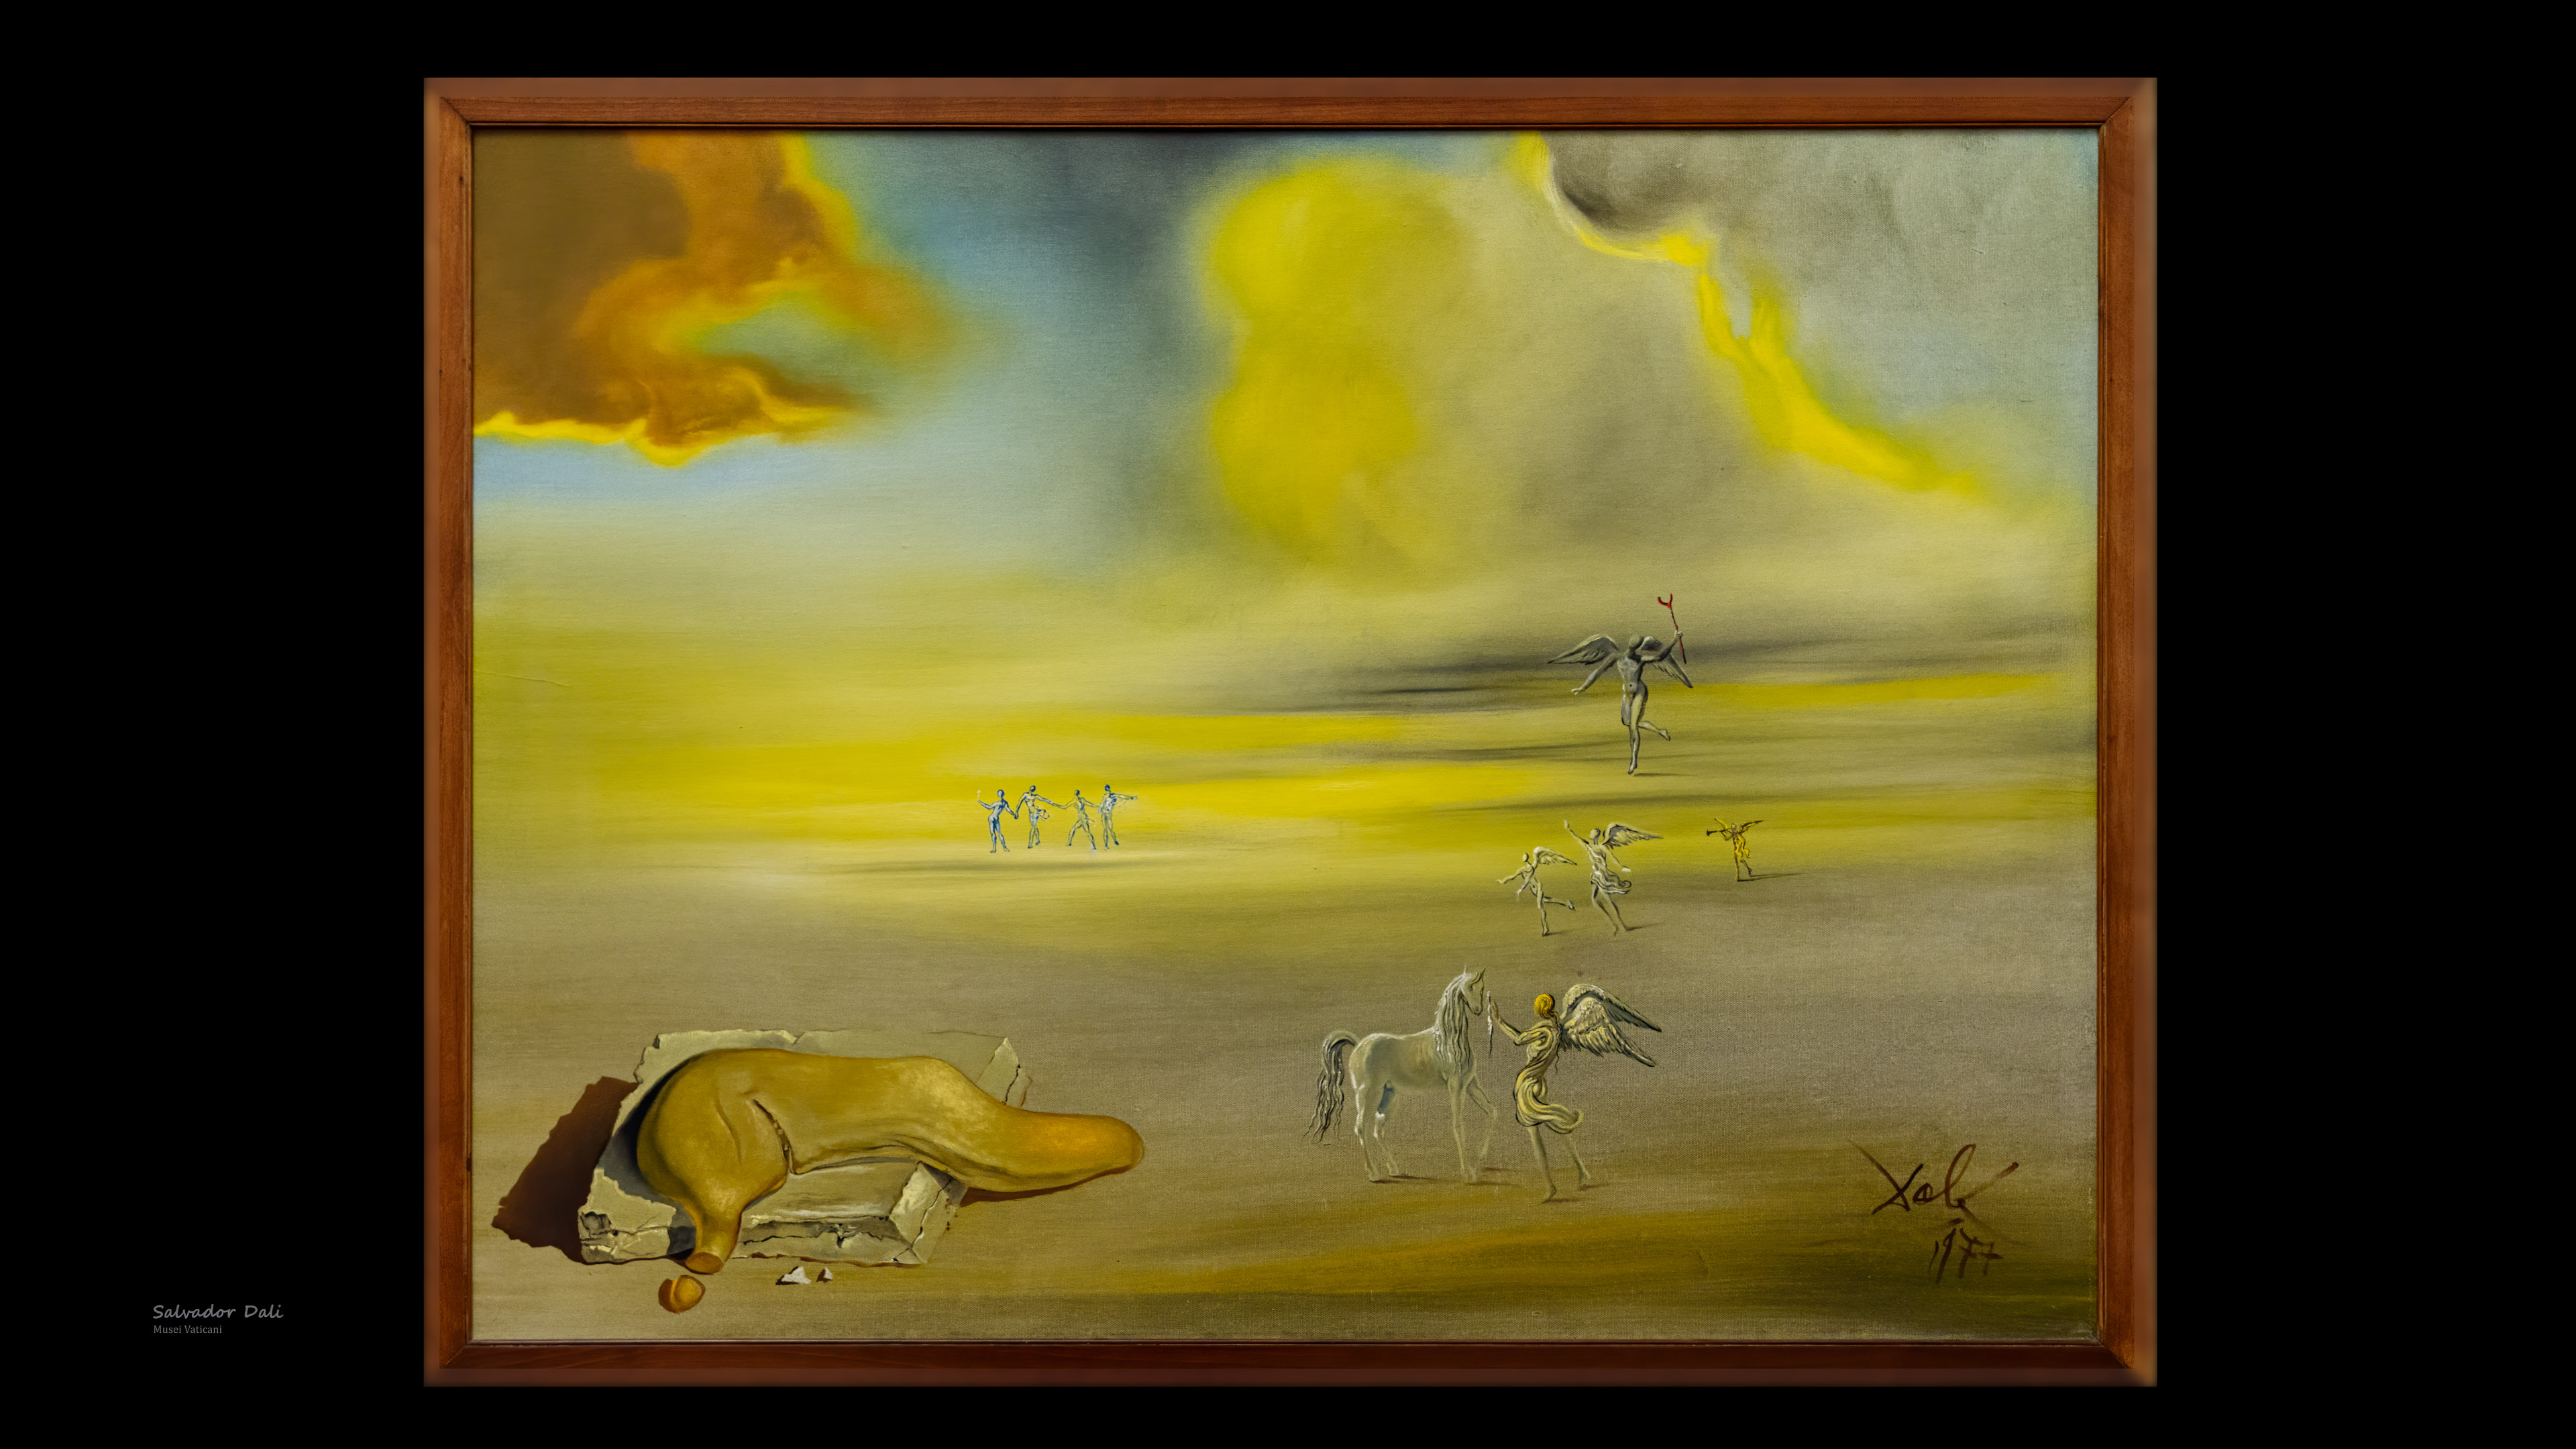 Get inspired with the Salvador Dali free painting wallpaper for PC in 4K ultra HD resolution.